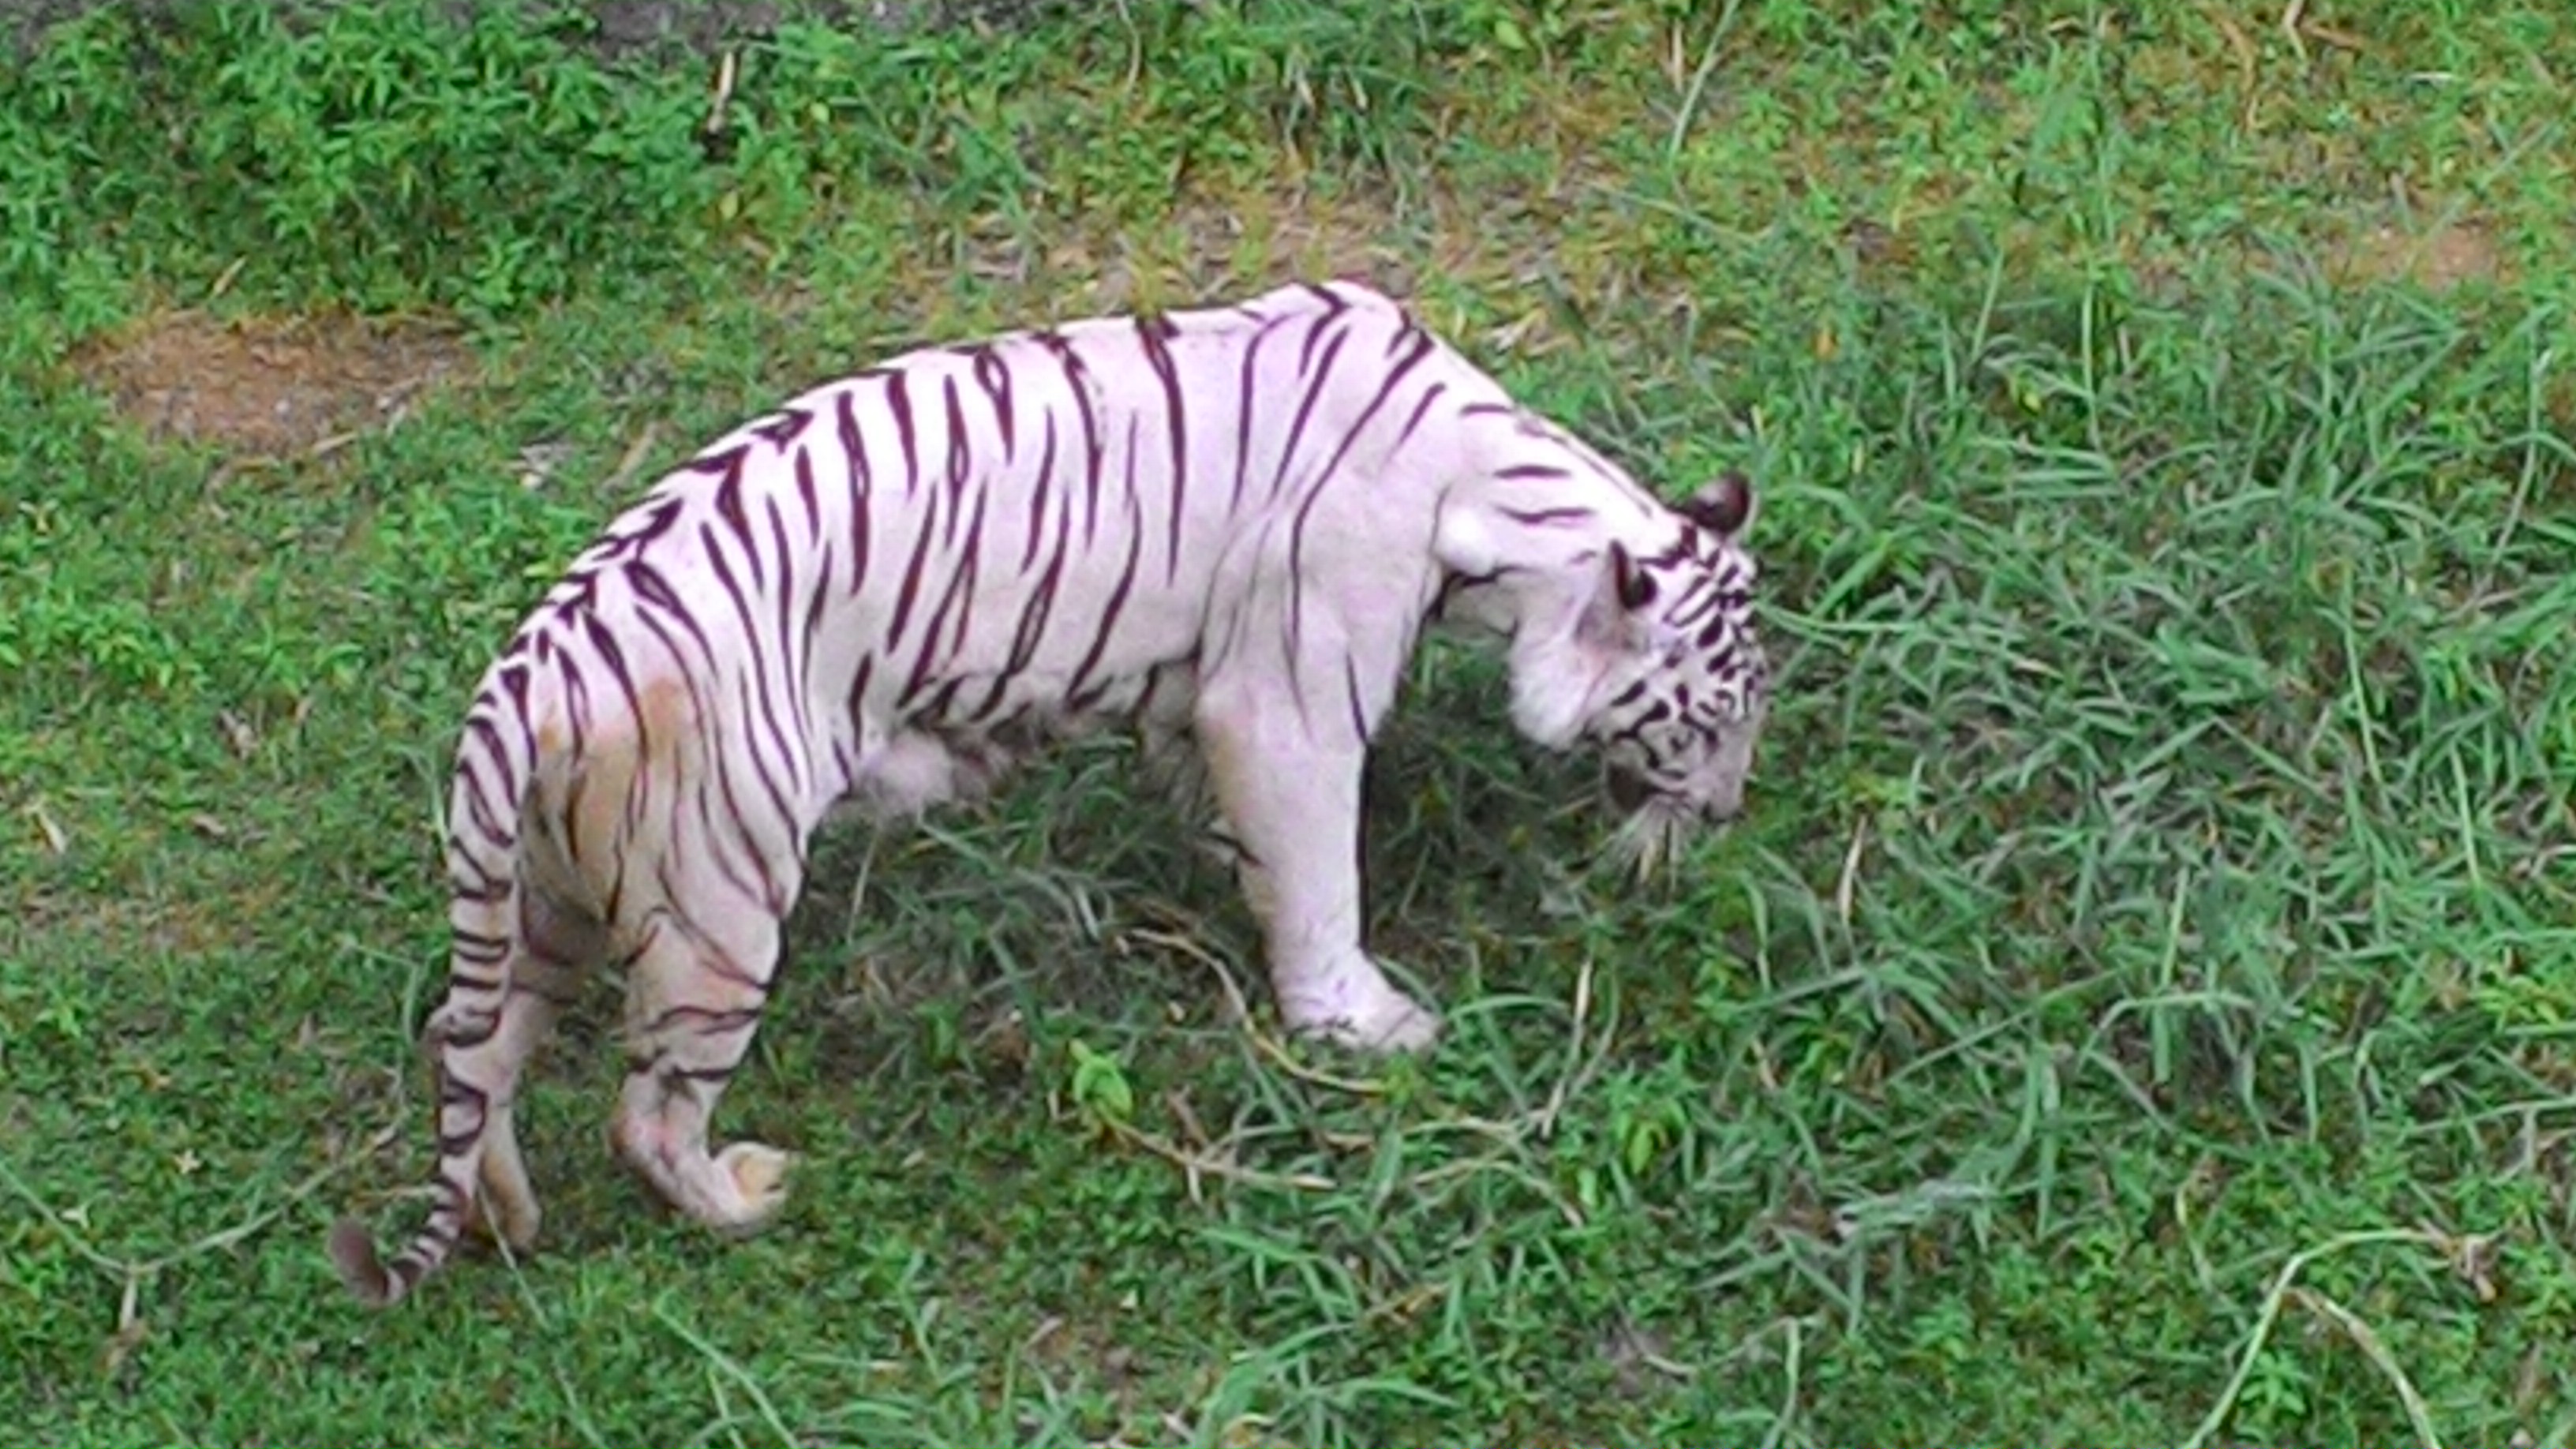 File:A rare image the tiger eating grass in order to digest the  -  Wikimedia Commons